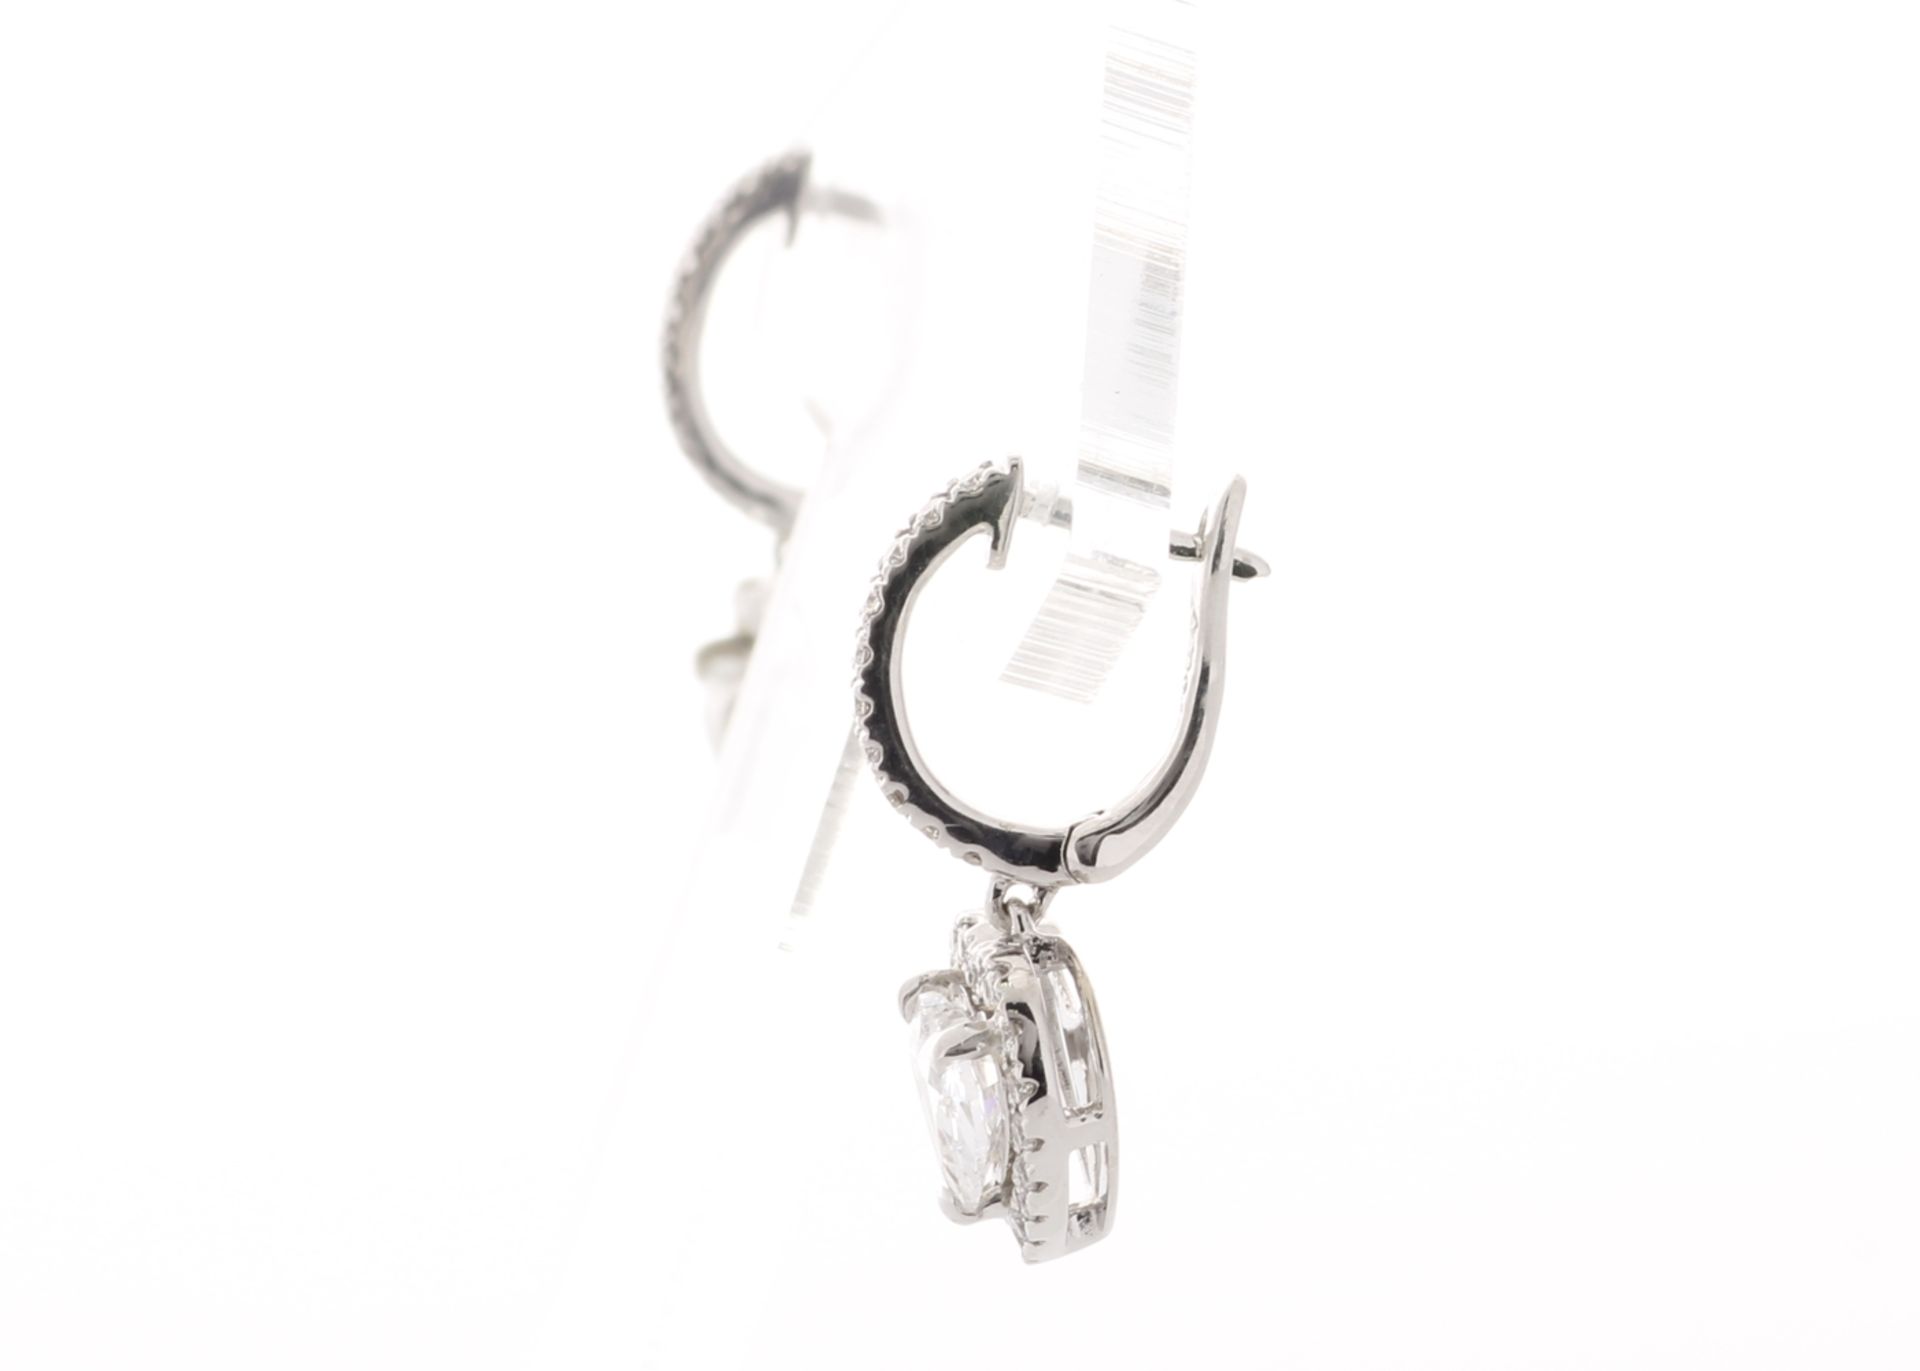 18ct White Gold Heart Shape Halo Drop Earring (1.34) 1.74 Carats - Valued by GIE £37,395.00 - Two - Image 3 of 5